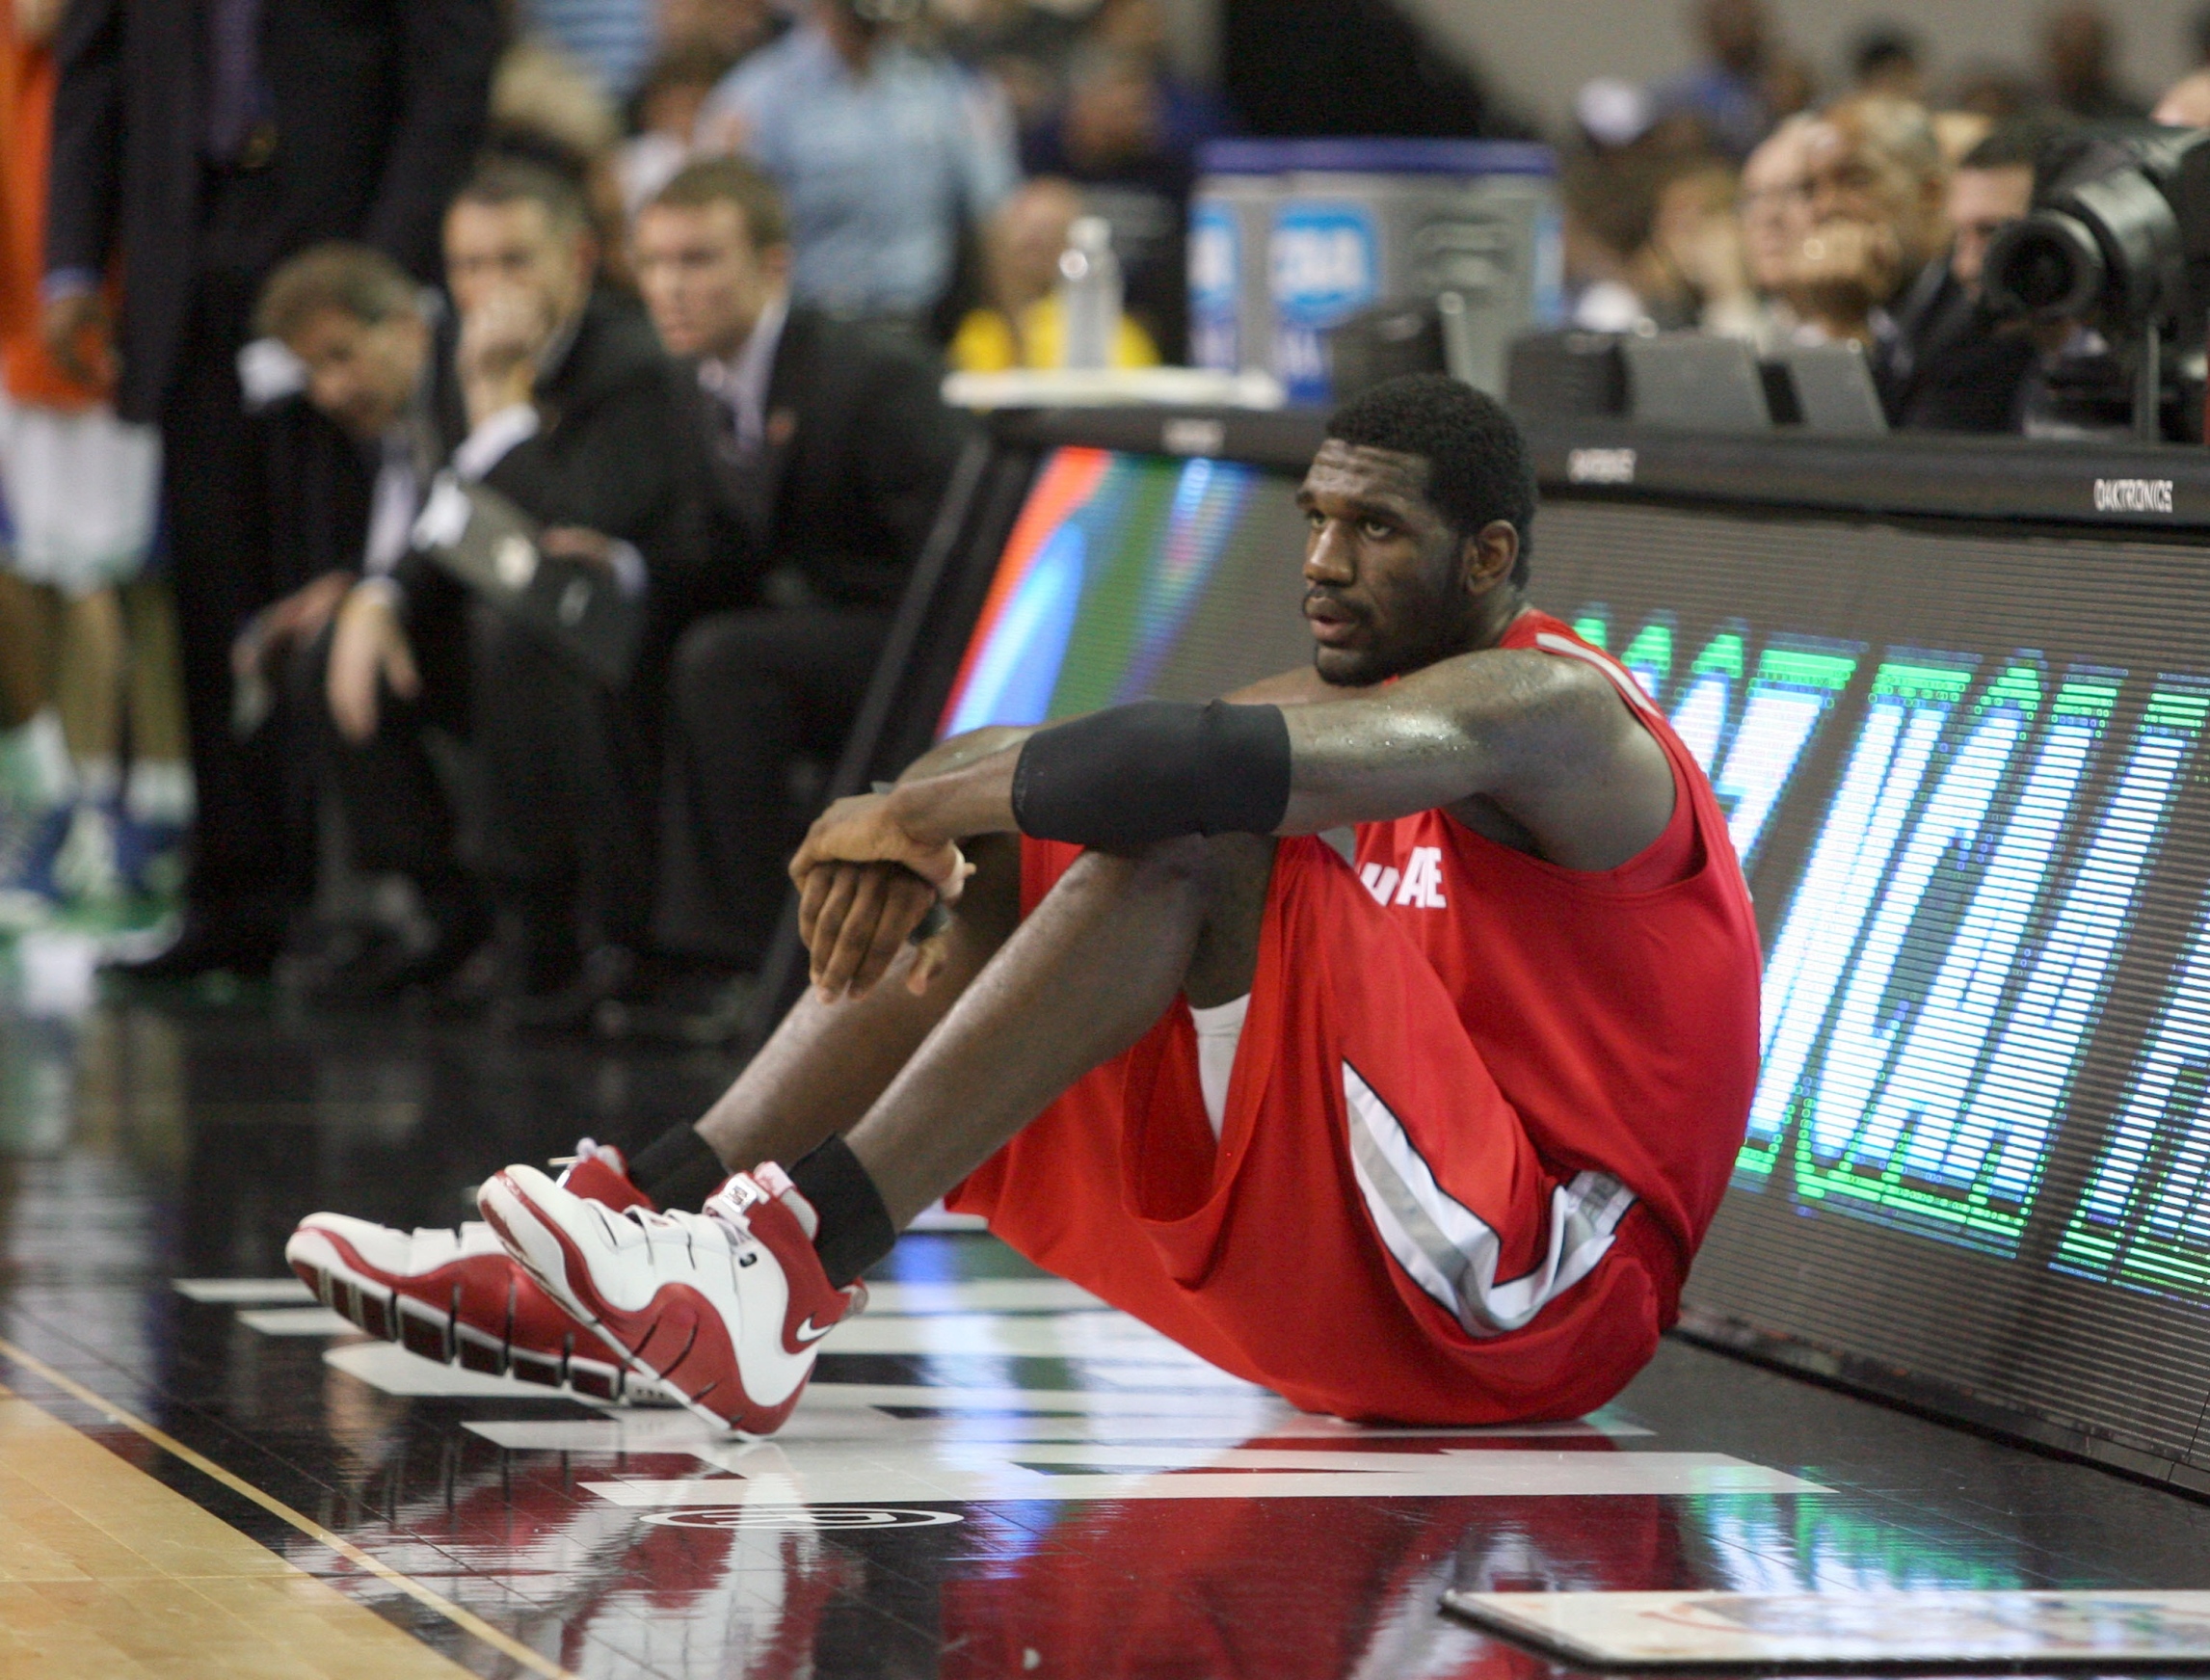 Ohio State's Greg Oden reacts to the crowd before an interview